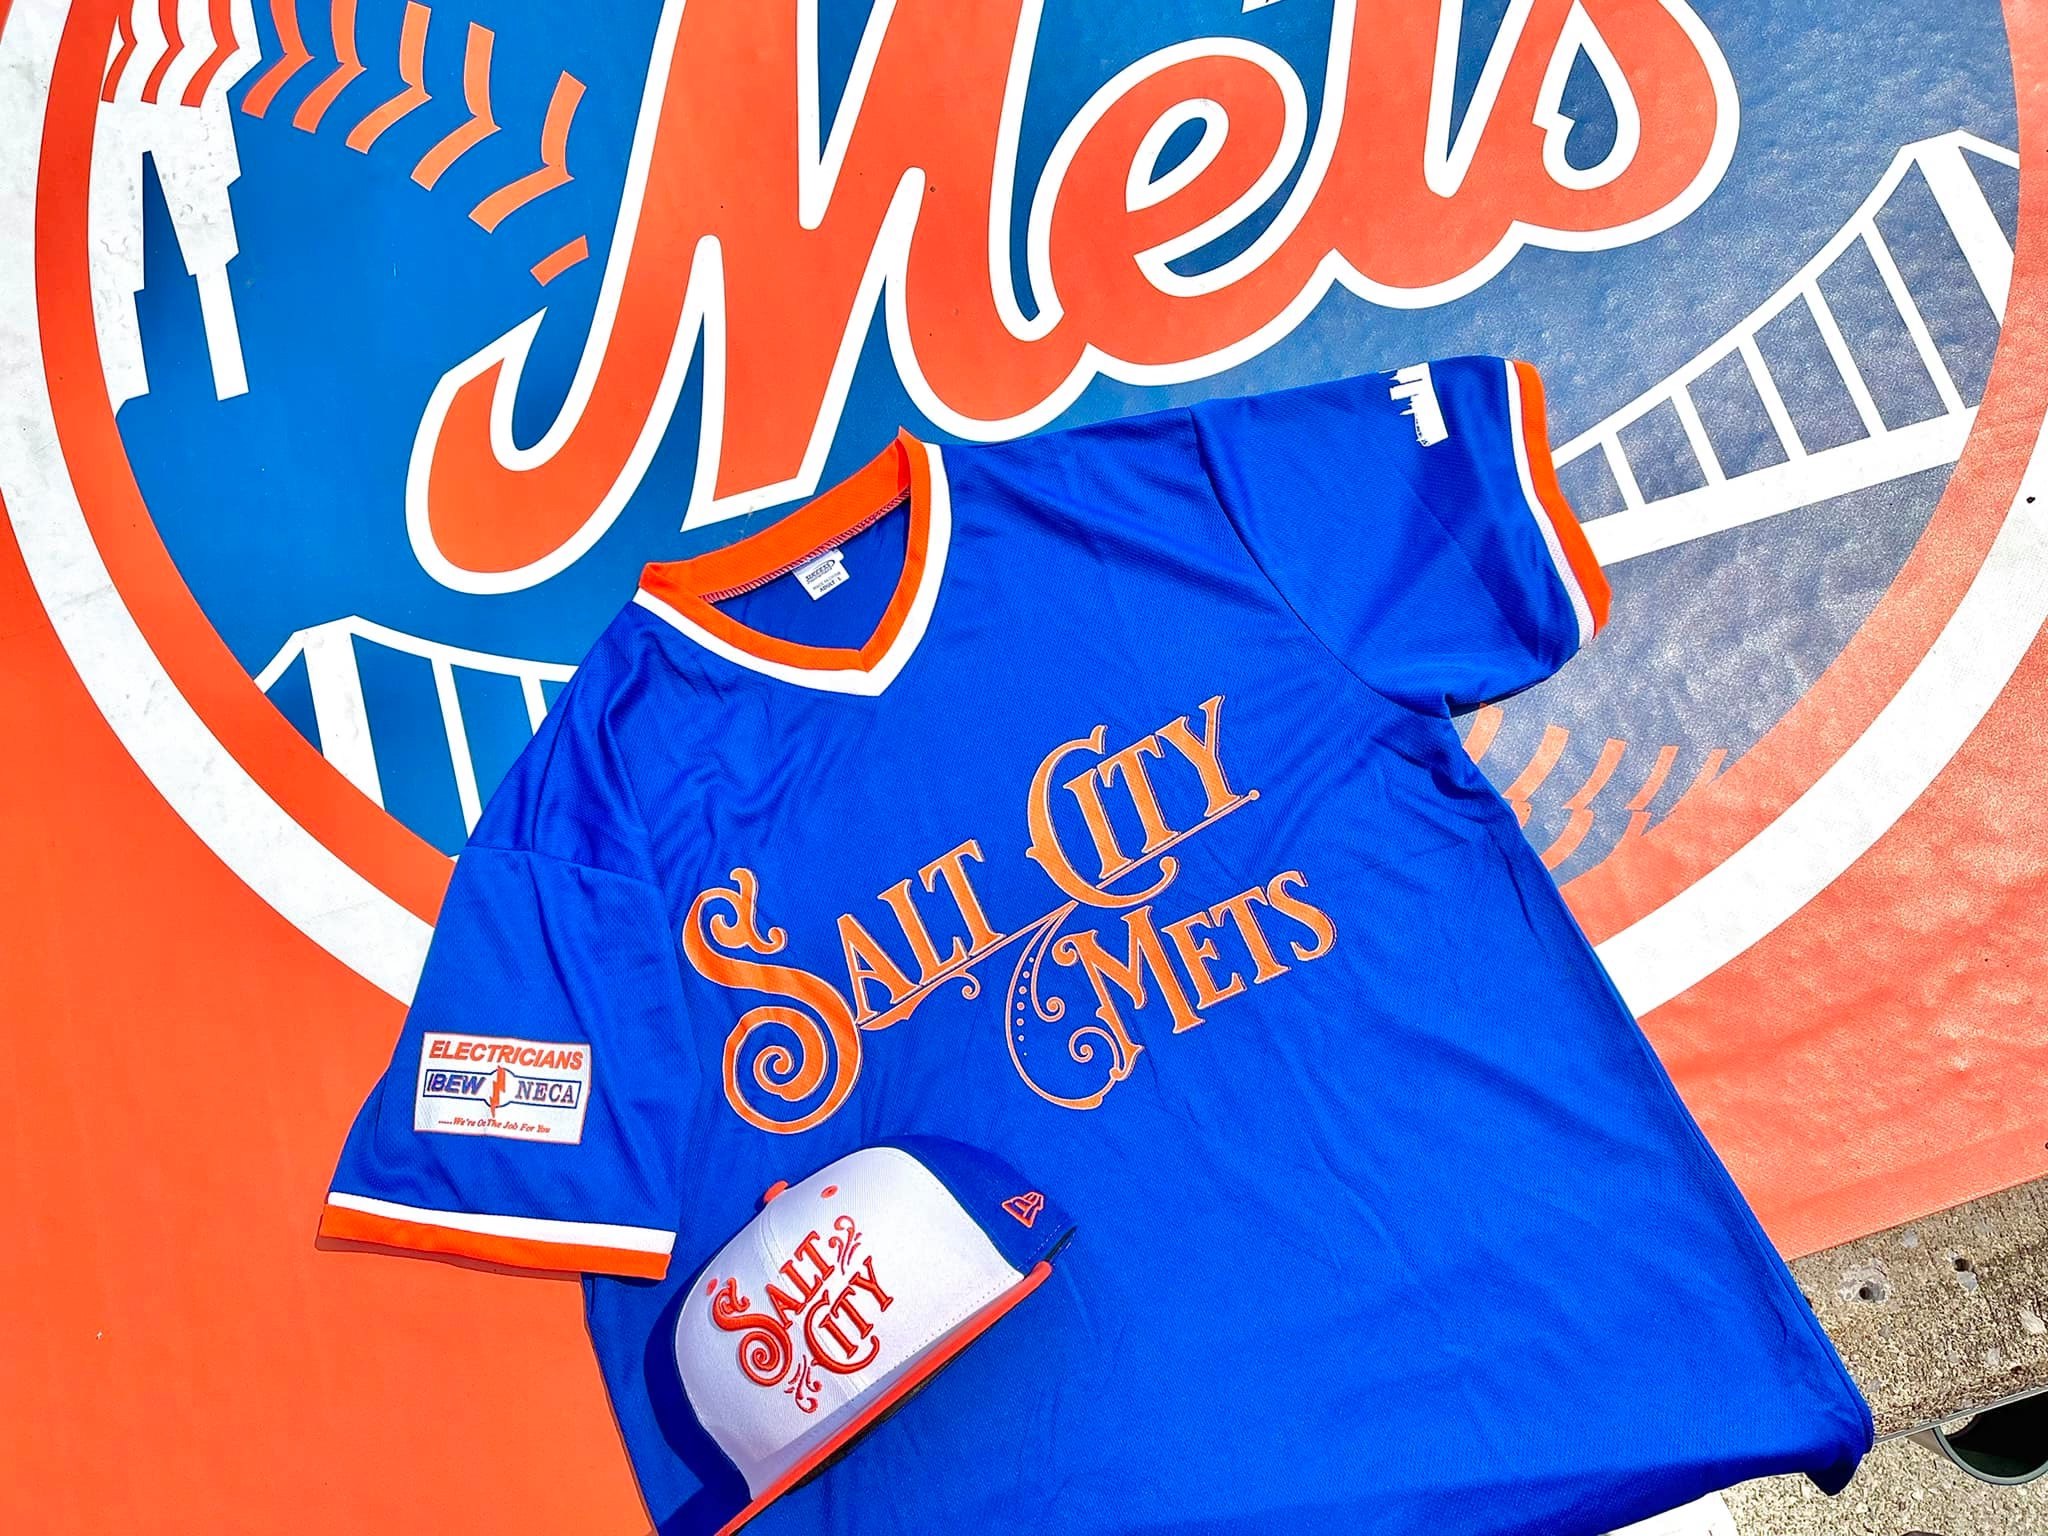 Syracuse Mets celebrate healthcare workers and a new 'nickname' in